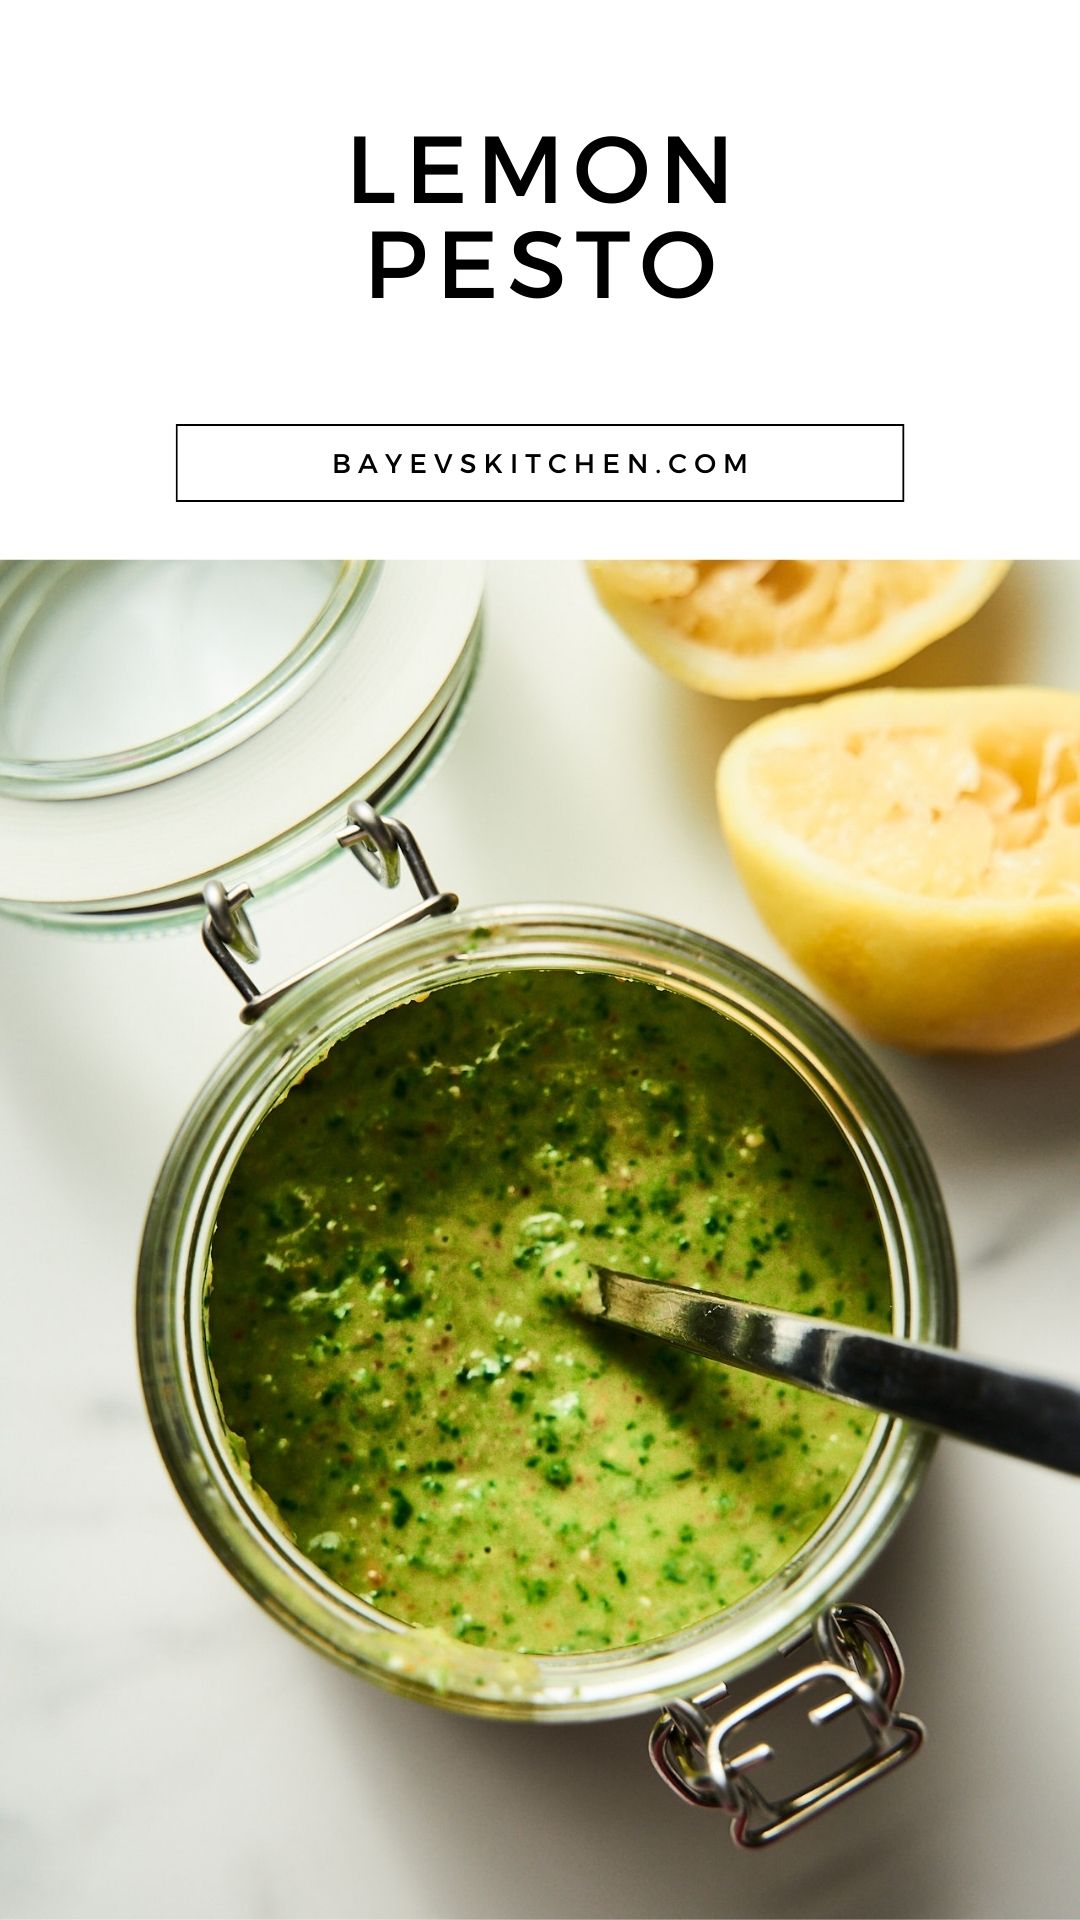 Quick And Easy Lemon Pesto Recipe with Step By Step Video Instructions